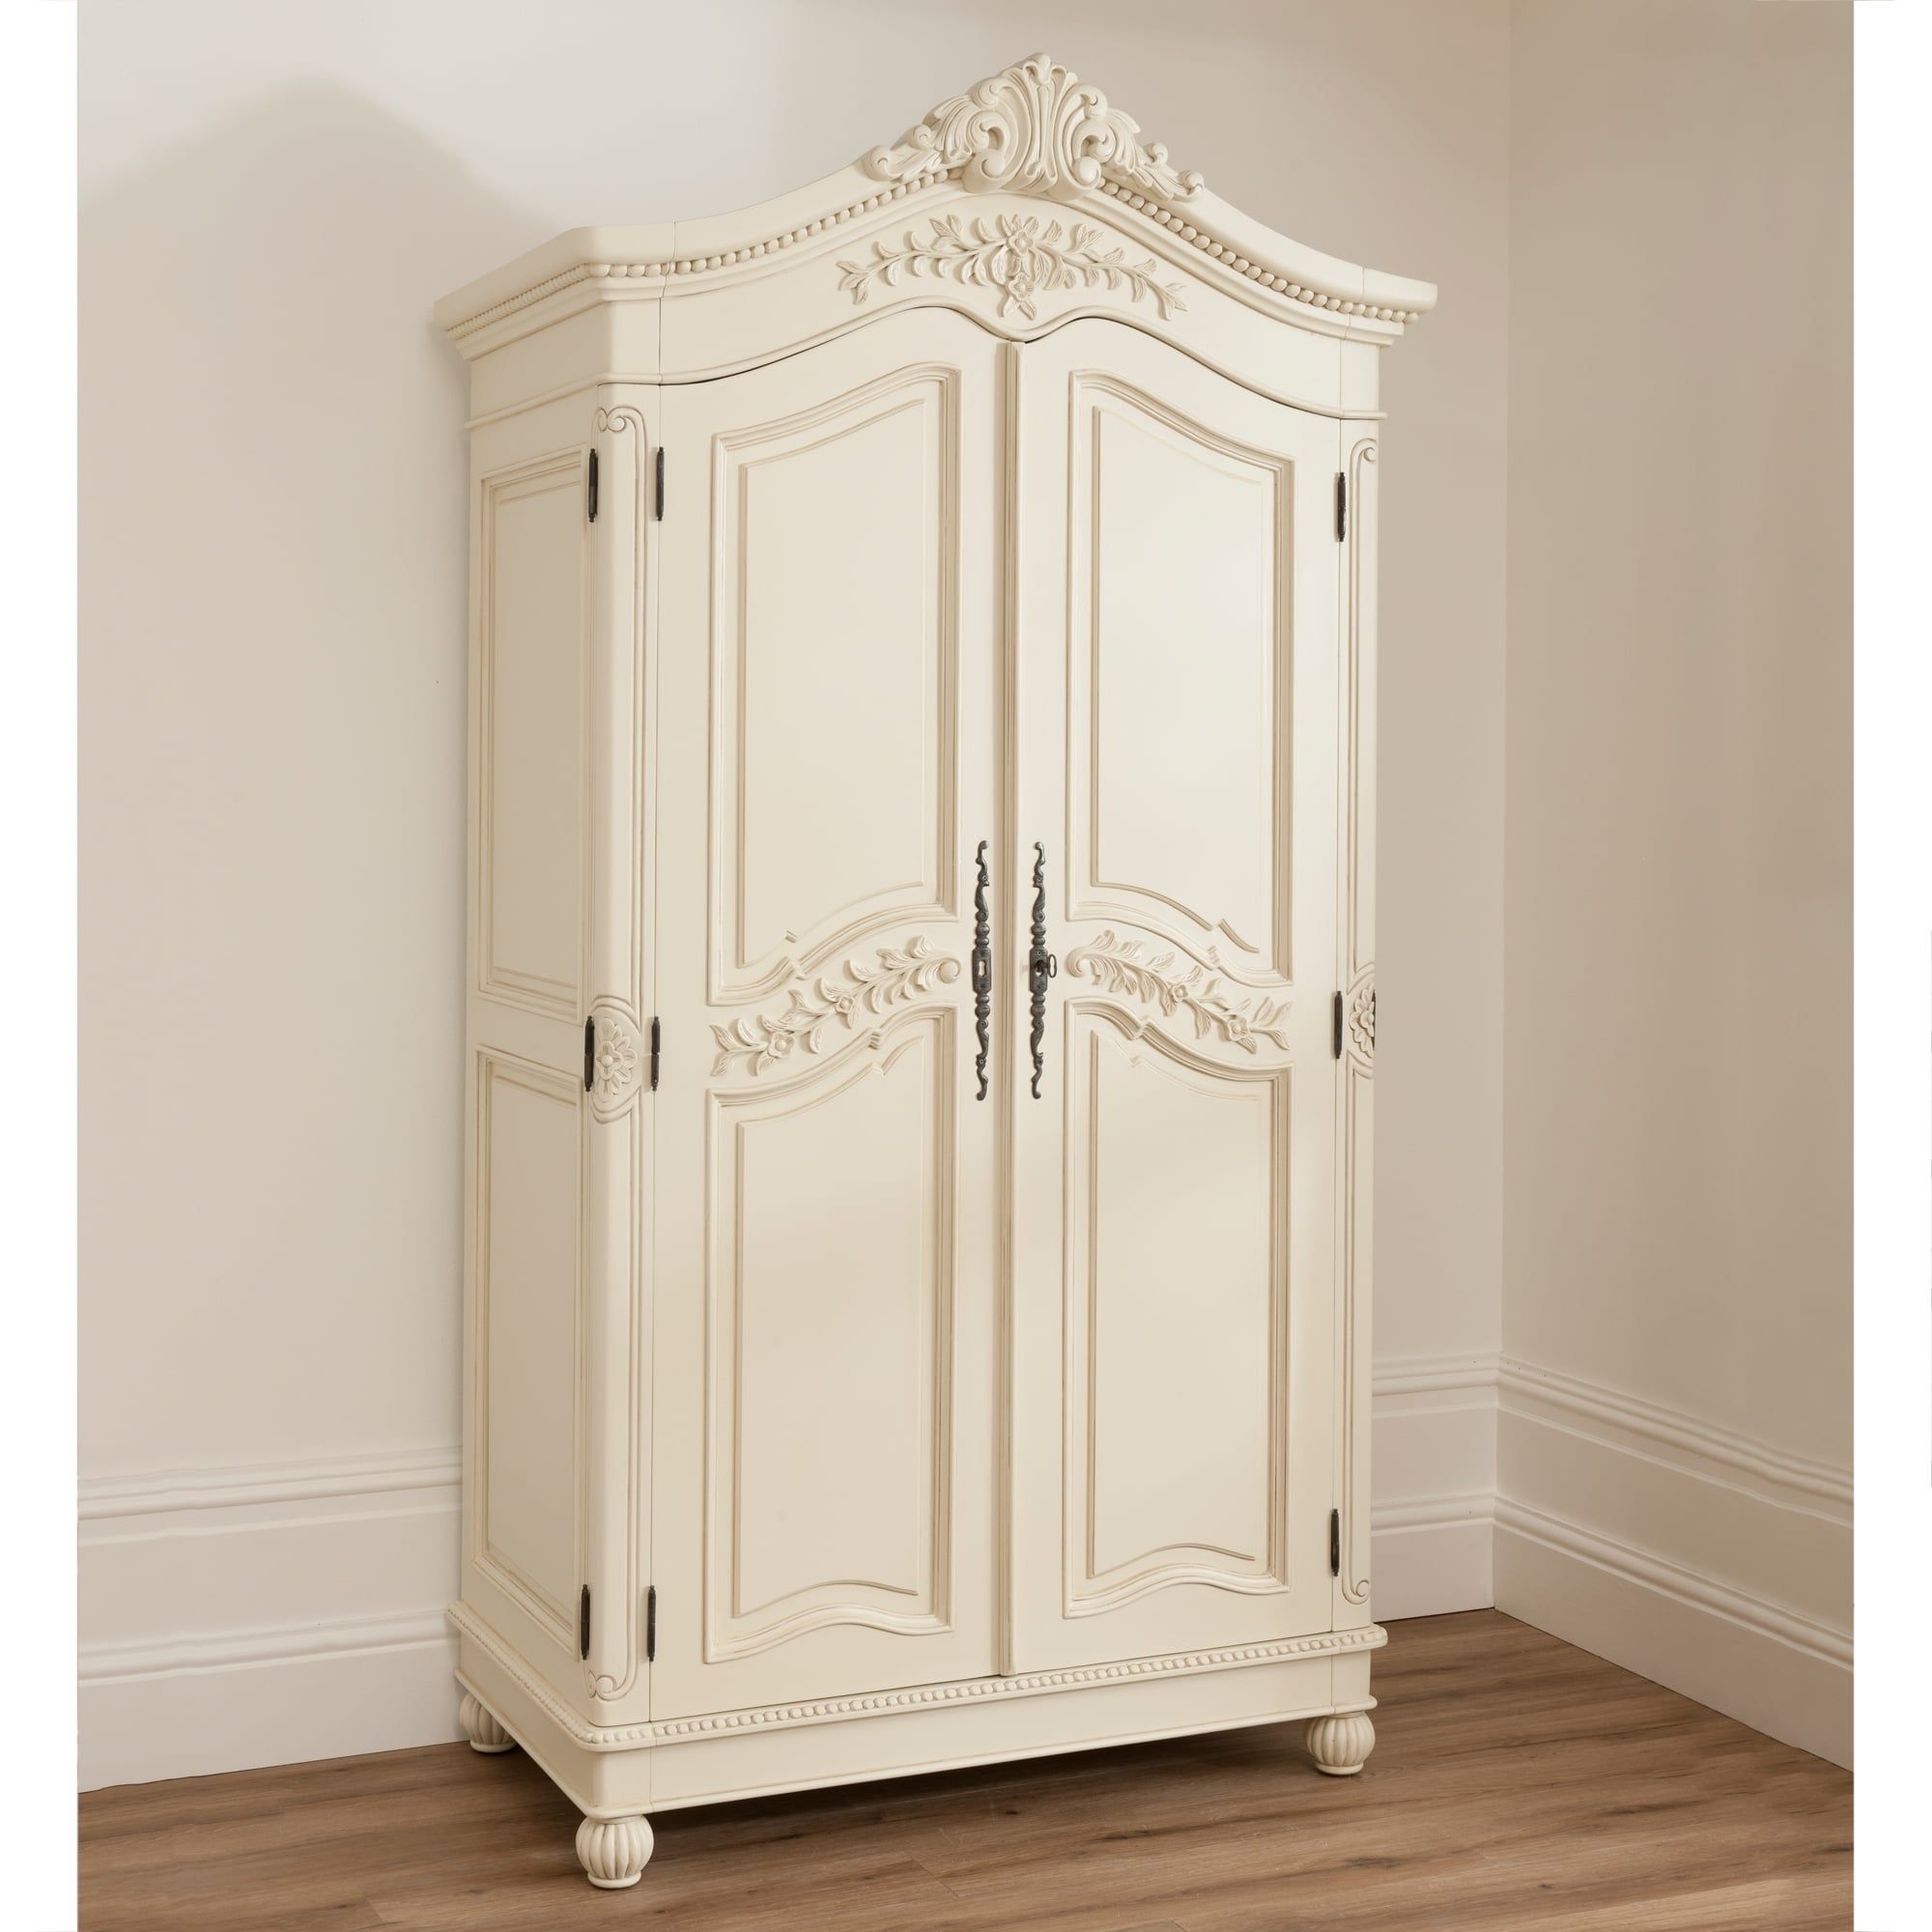 Shabby Chic Wardrobe For Your New Modern Lifestyle – Darbylanefurniture  | Shabby Chic Wardrobe, Shabby Chic Bathroom, Shabby Chic Curtains Throughout Chic Wardrobes (Photo 4 of 15)